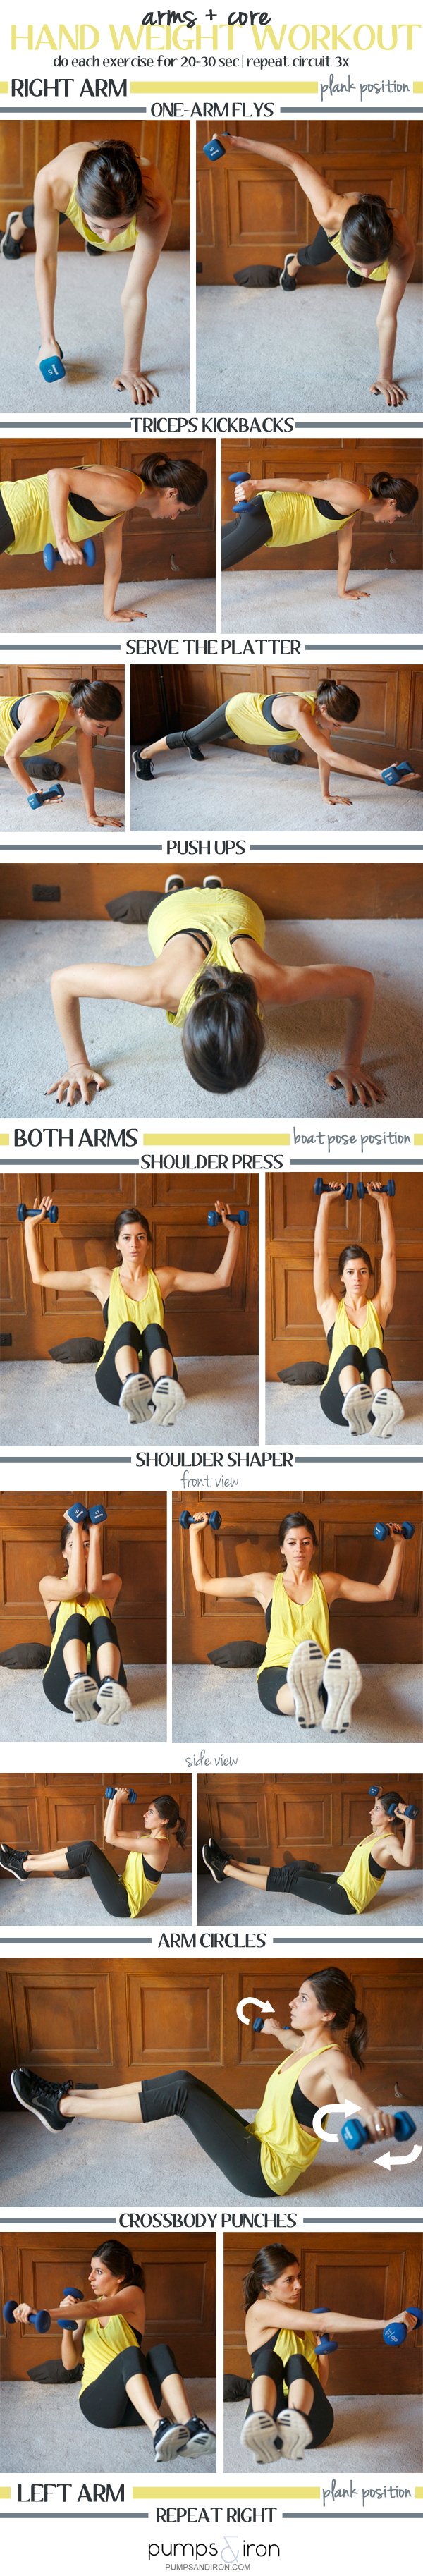 arm-core-hand-weight-workout | Hand weight workouts, Weights workout